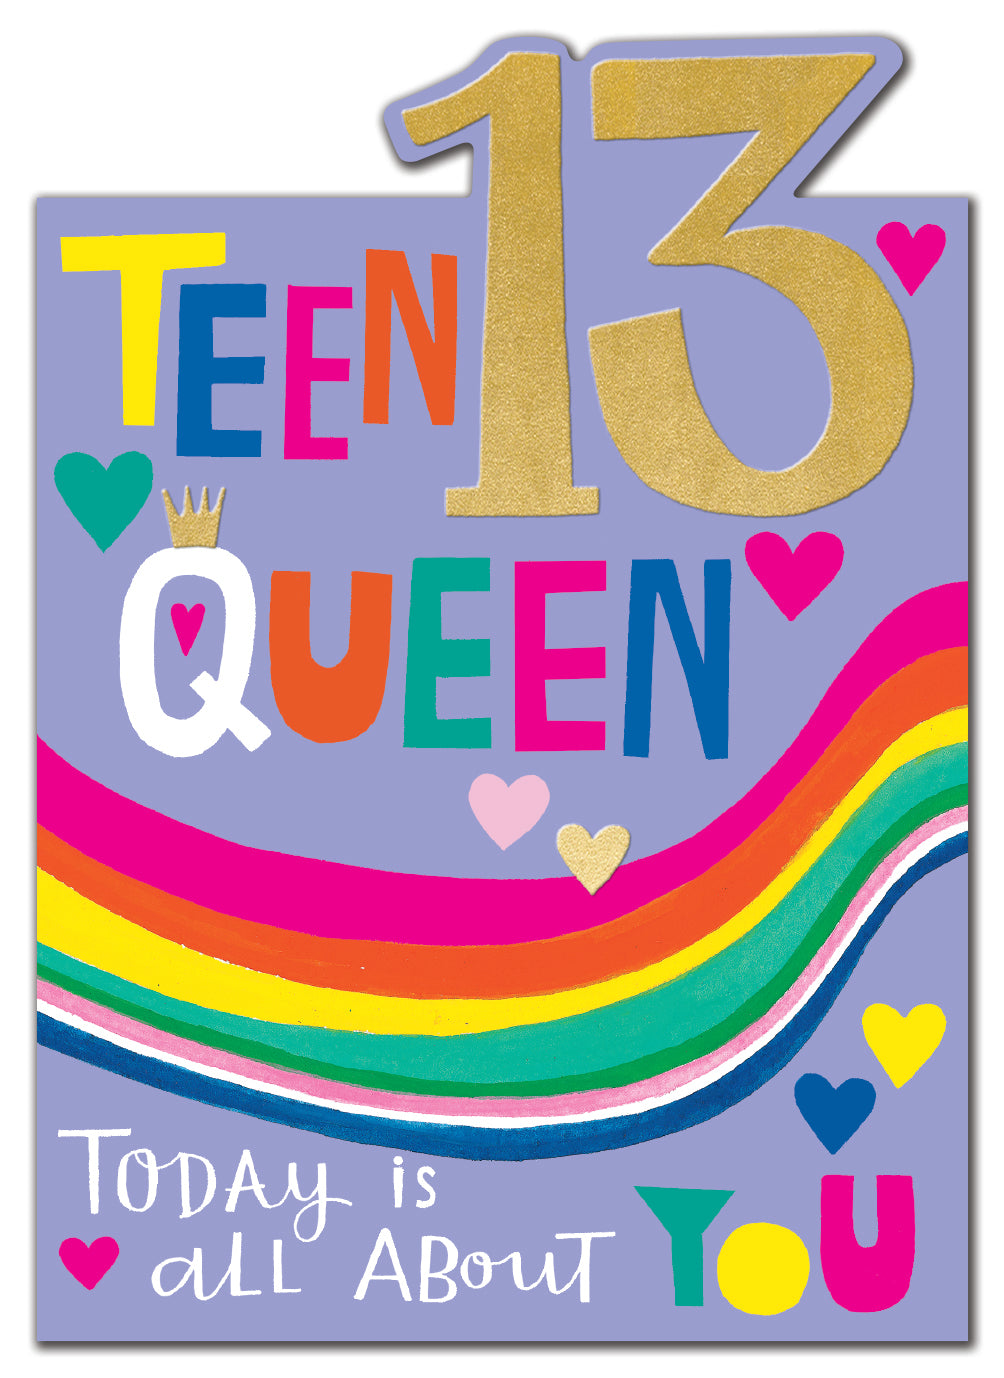 Teen Queen 13th Birthday Card from Penny Black